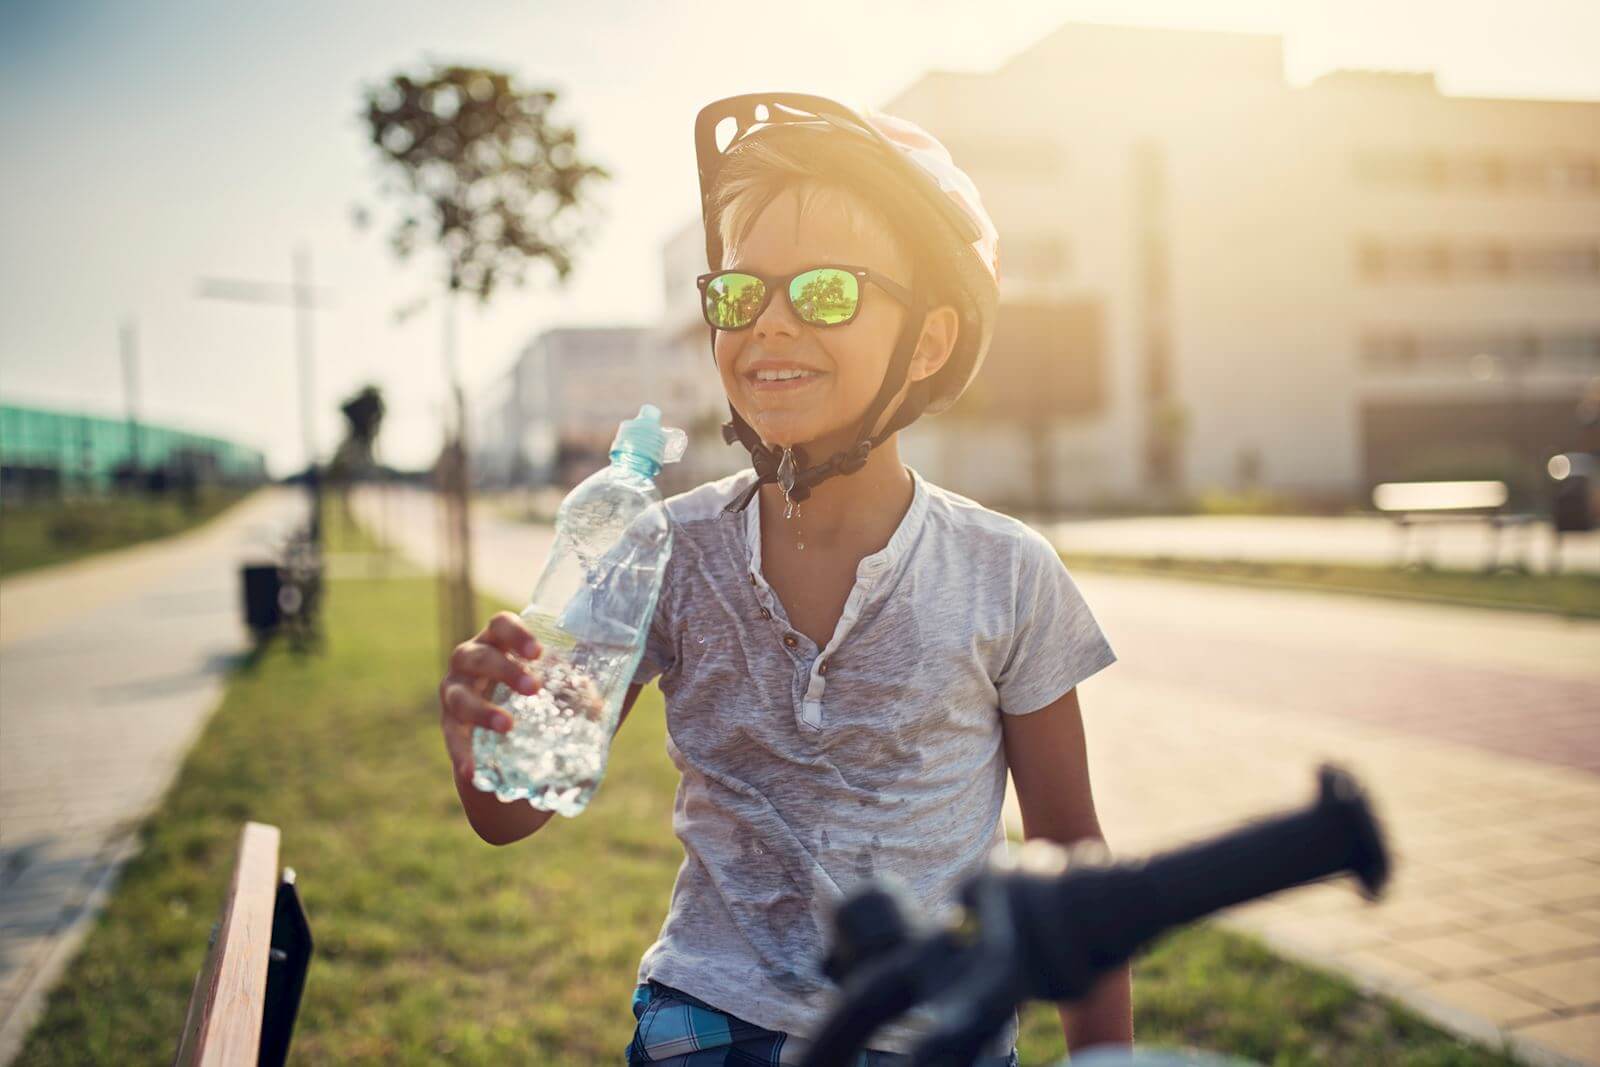 boy riding bike with water bottle